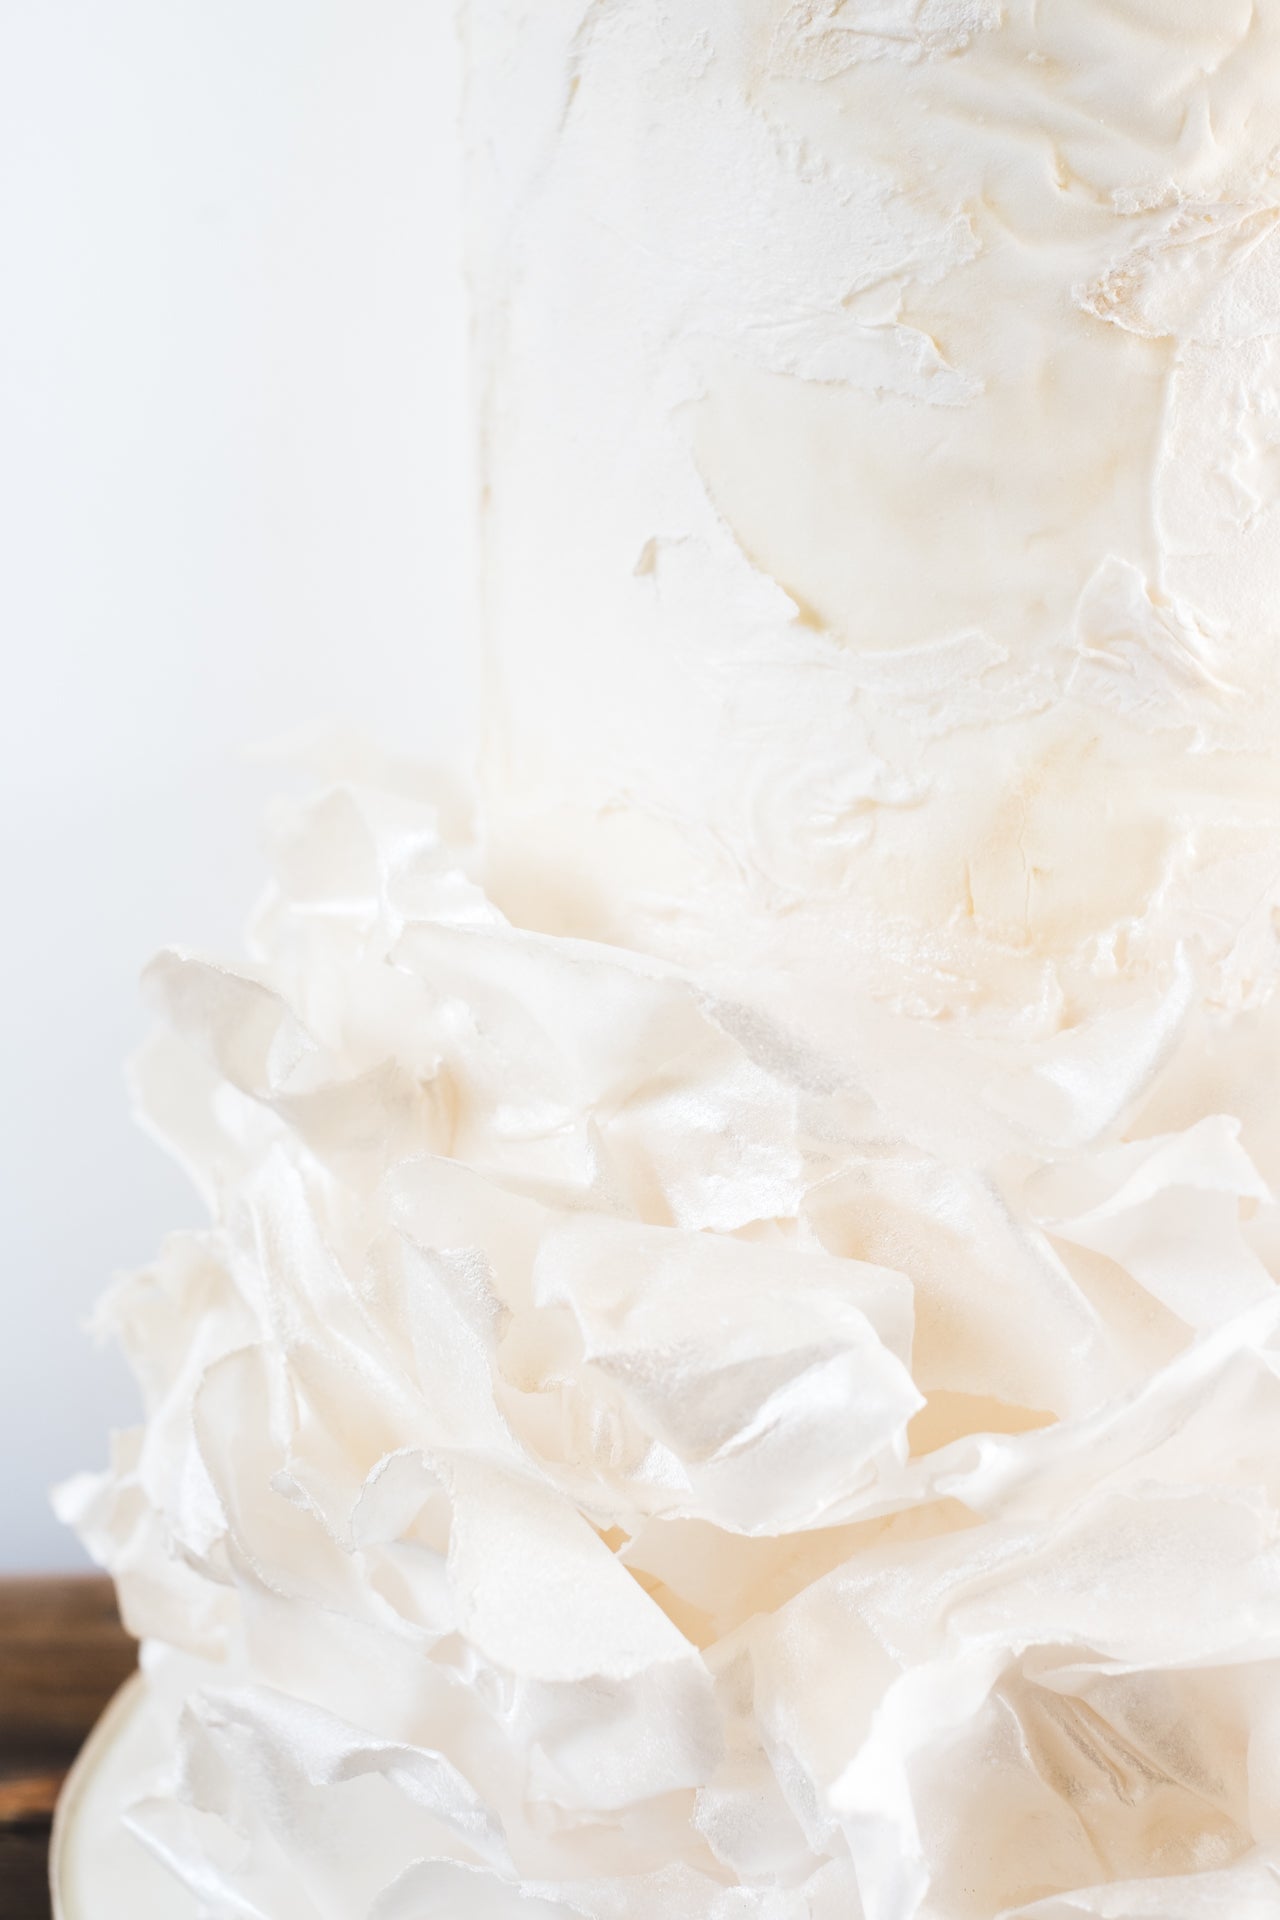 Contemporary wedding cake with modern ruffle, textured finish and dreamy ethereal look